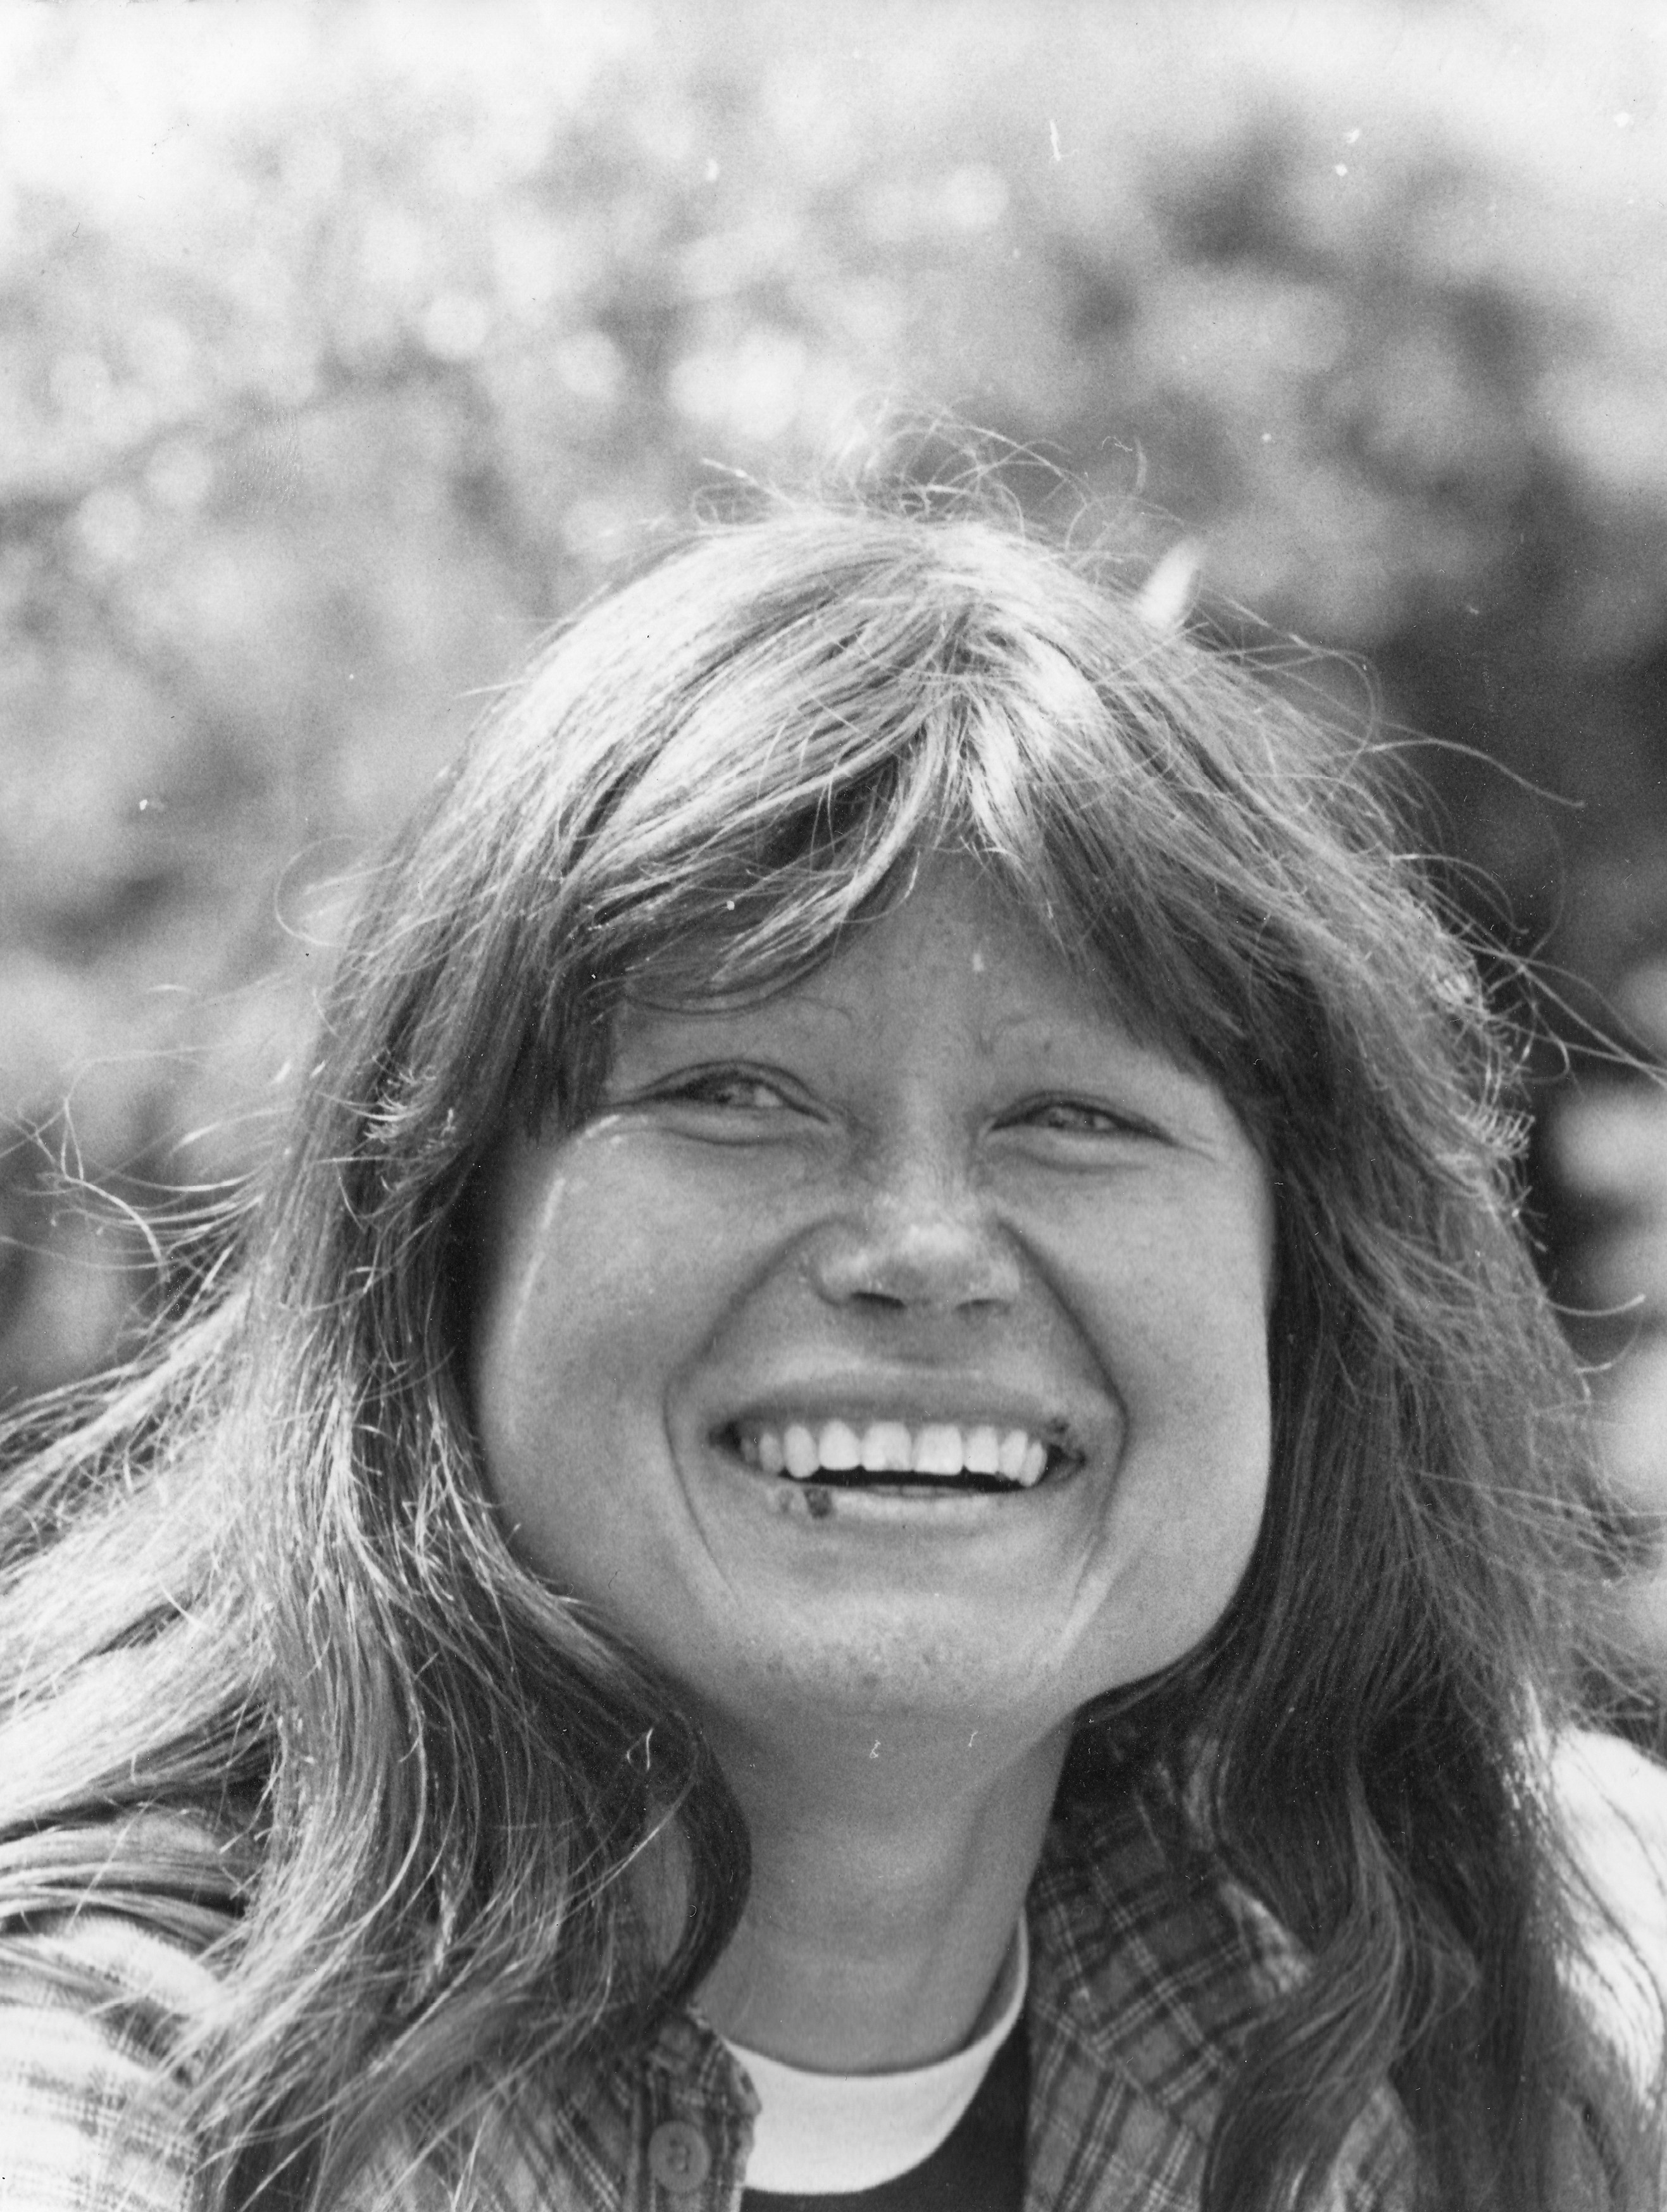 Alena Čepelková during an expedition to the Soviet Pamir Mountains, 1983